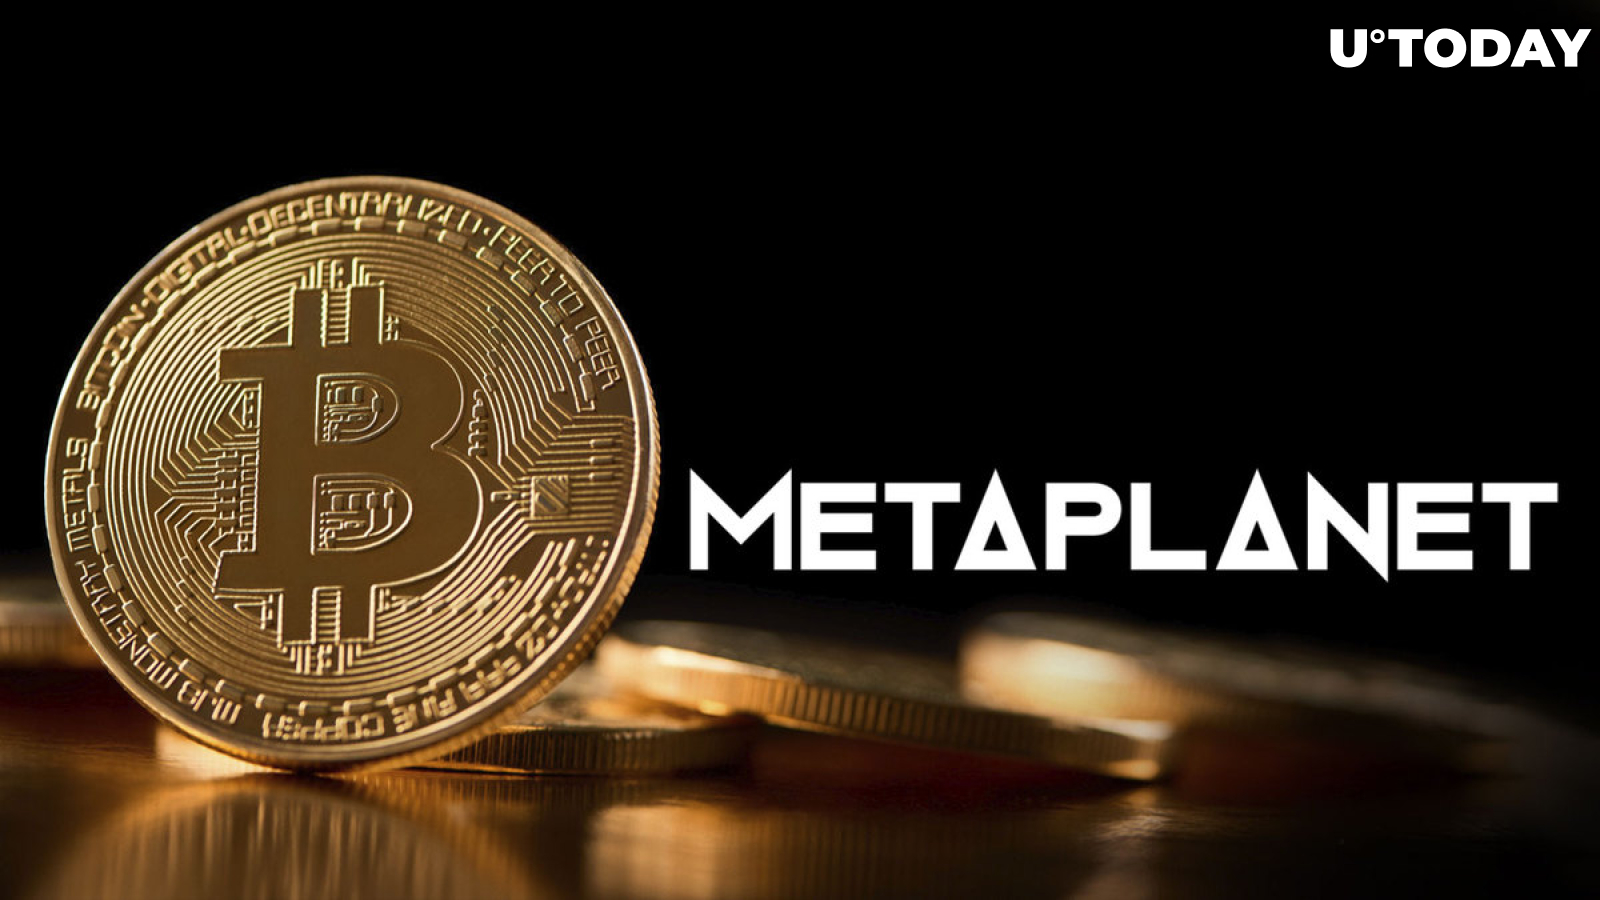 'Asia's MicroStrategy' Metaplanet Tops up Bitcoin Portfolio in Latest Purchase